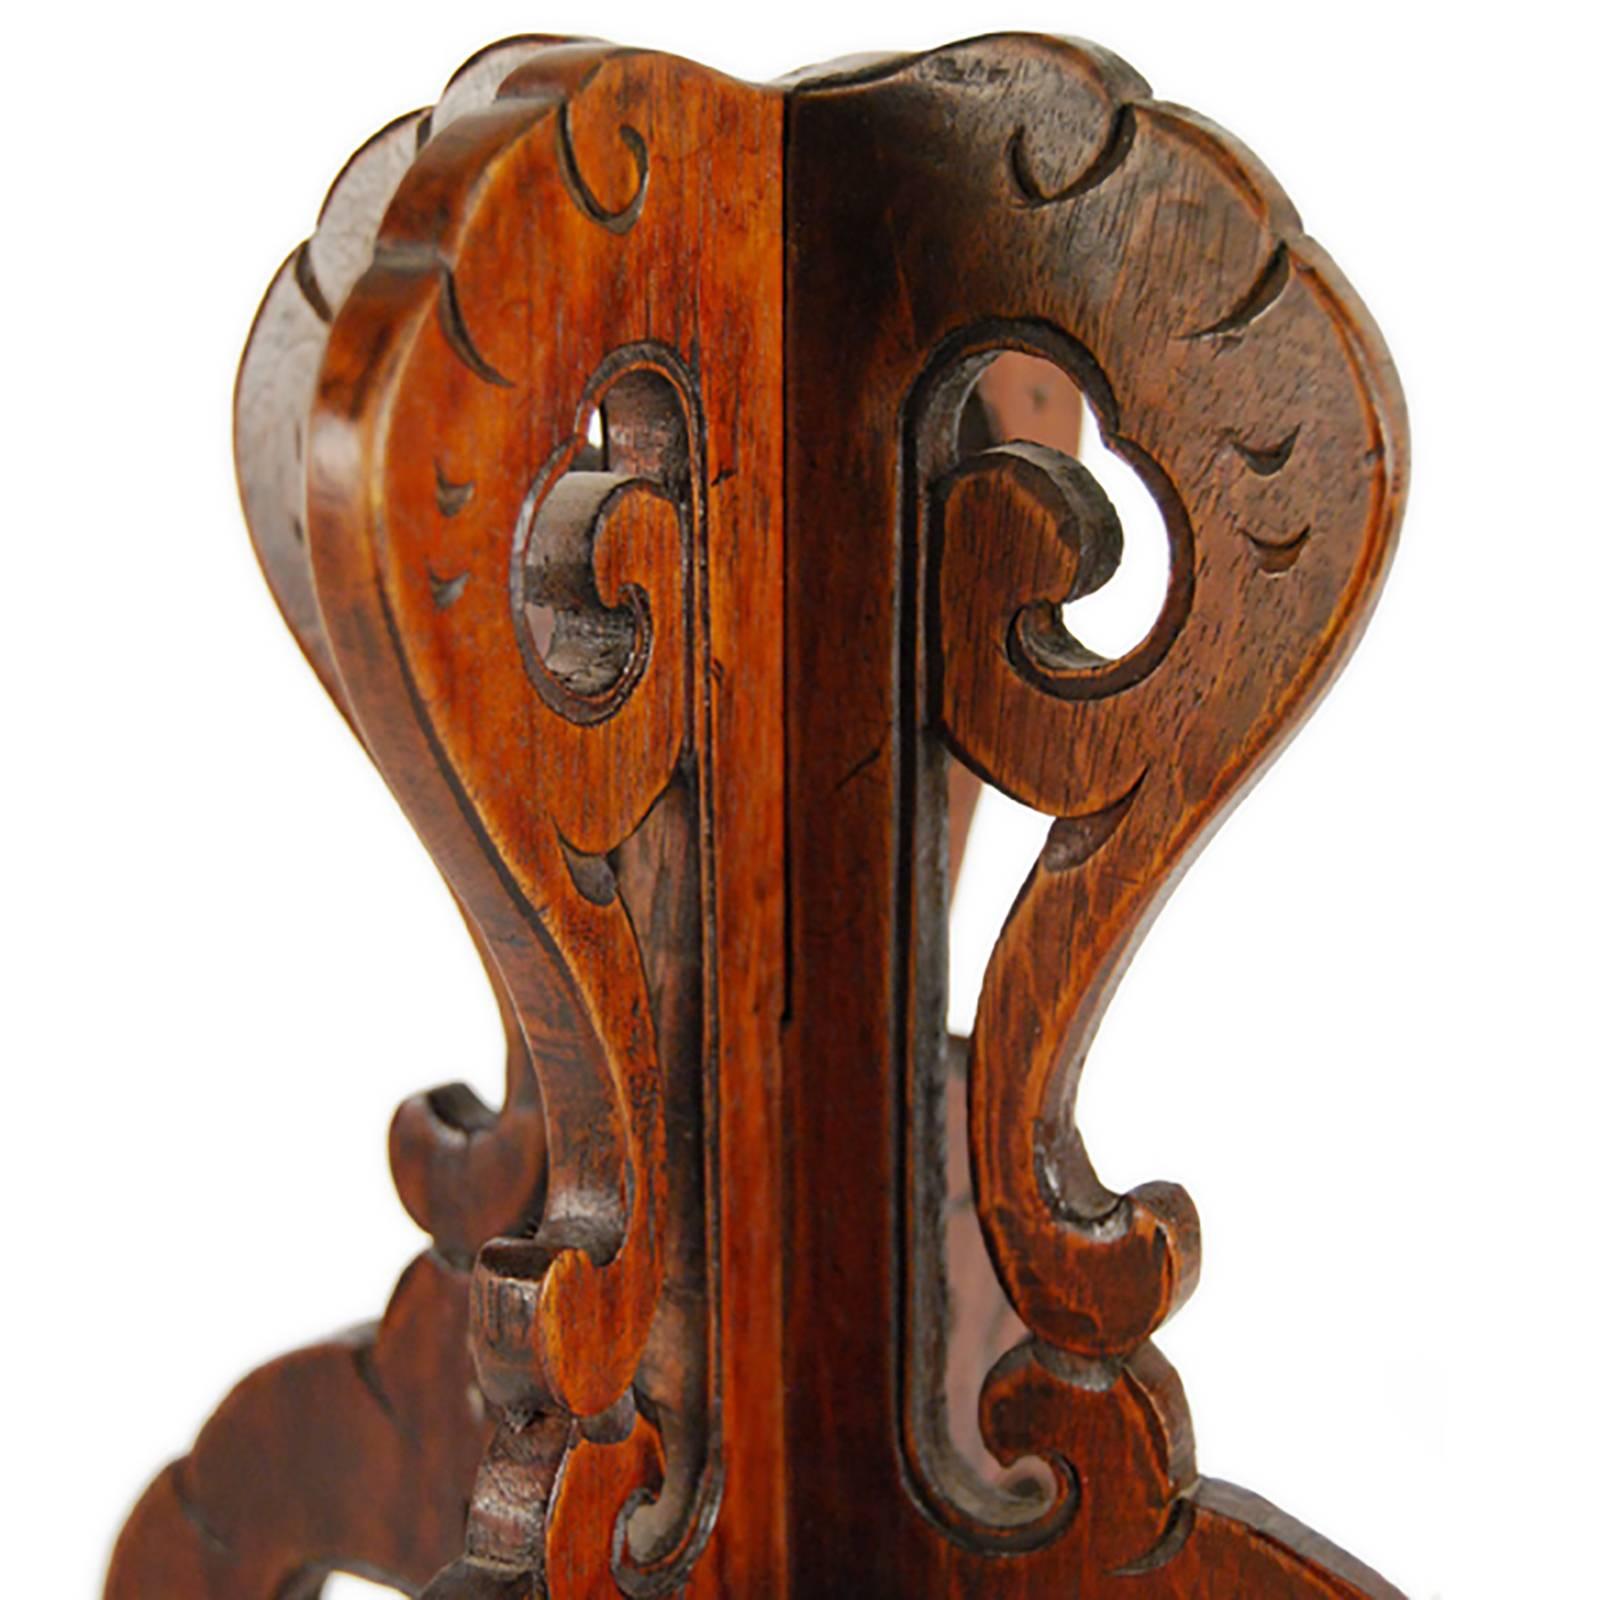 Out of context, this carved wood hat stand has a curious, octopus-like appearance. Intricately embellished with carved flourishes, the hat Stand displays the opulence of court fashion, where rank and status was expressed through fashion and its